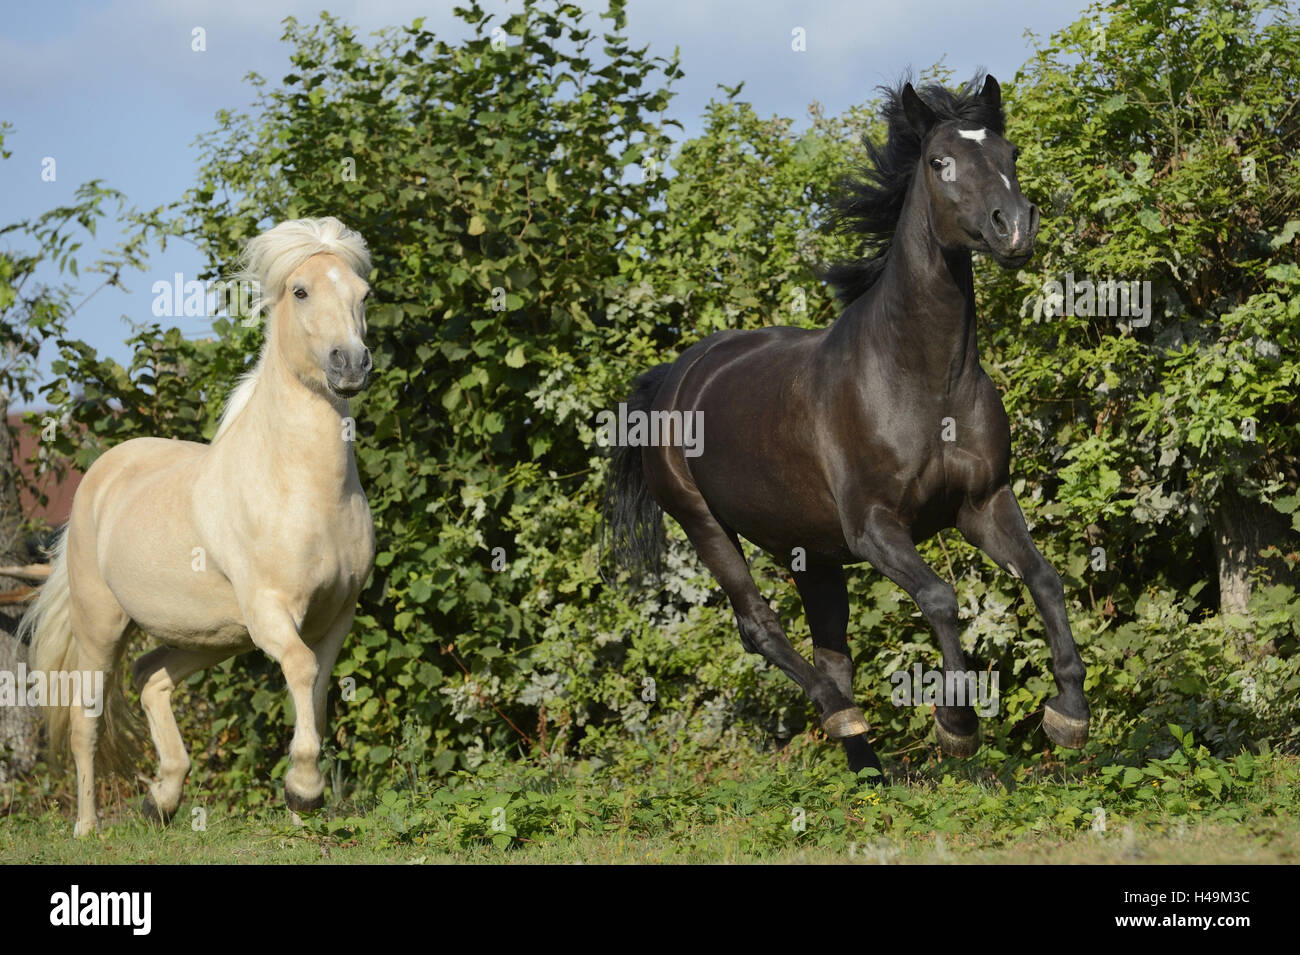 Horses, Arabo-Haflinger, Icelanders, meadow, at the side, gallop, Stock Photo